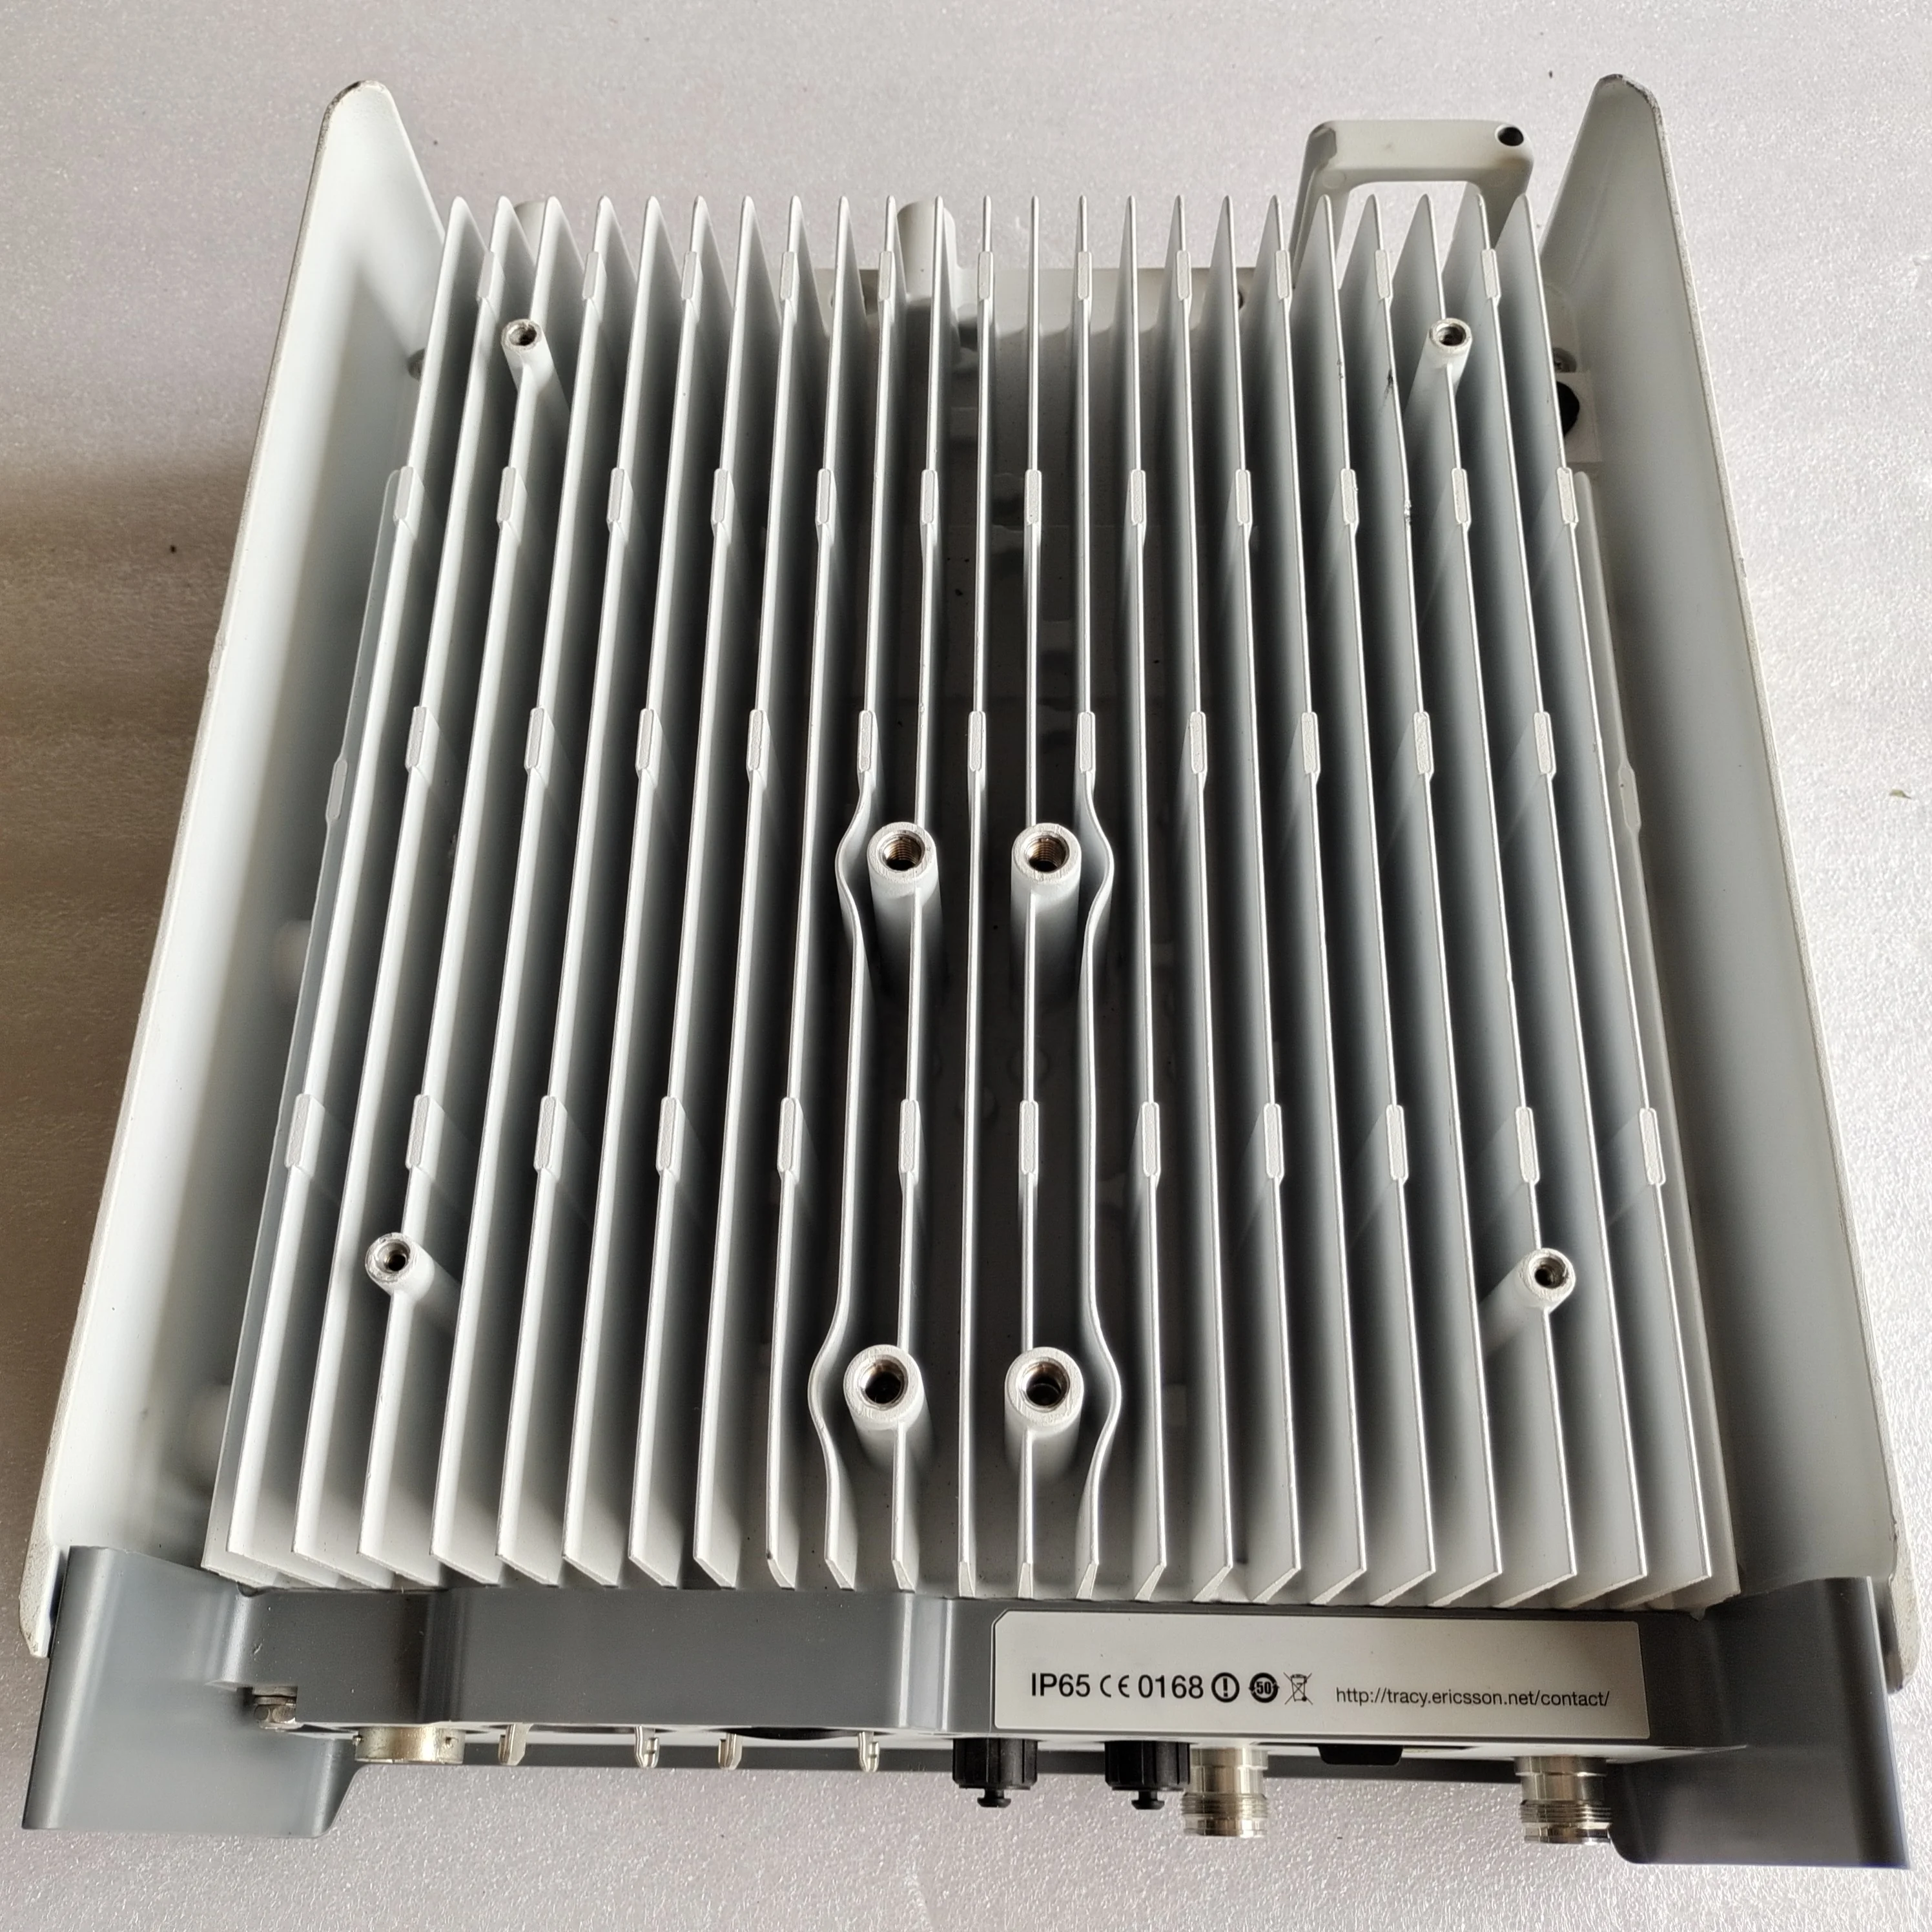 YUNPAN different gsm bts base station factory for stairwells